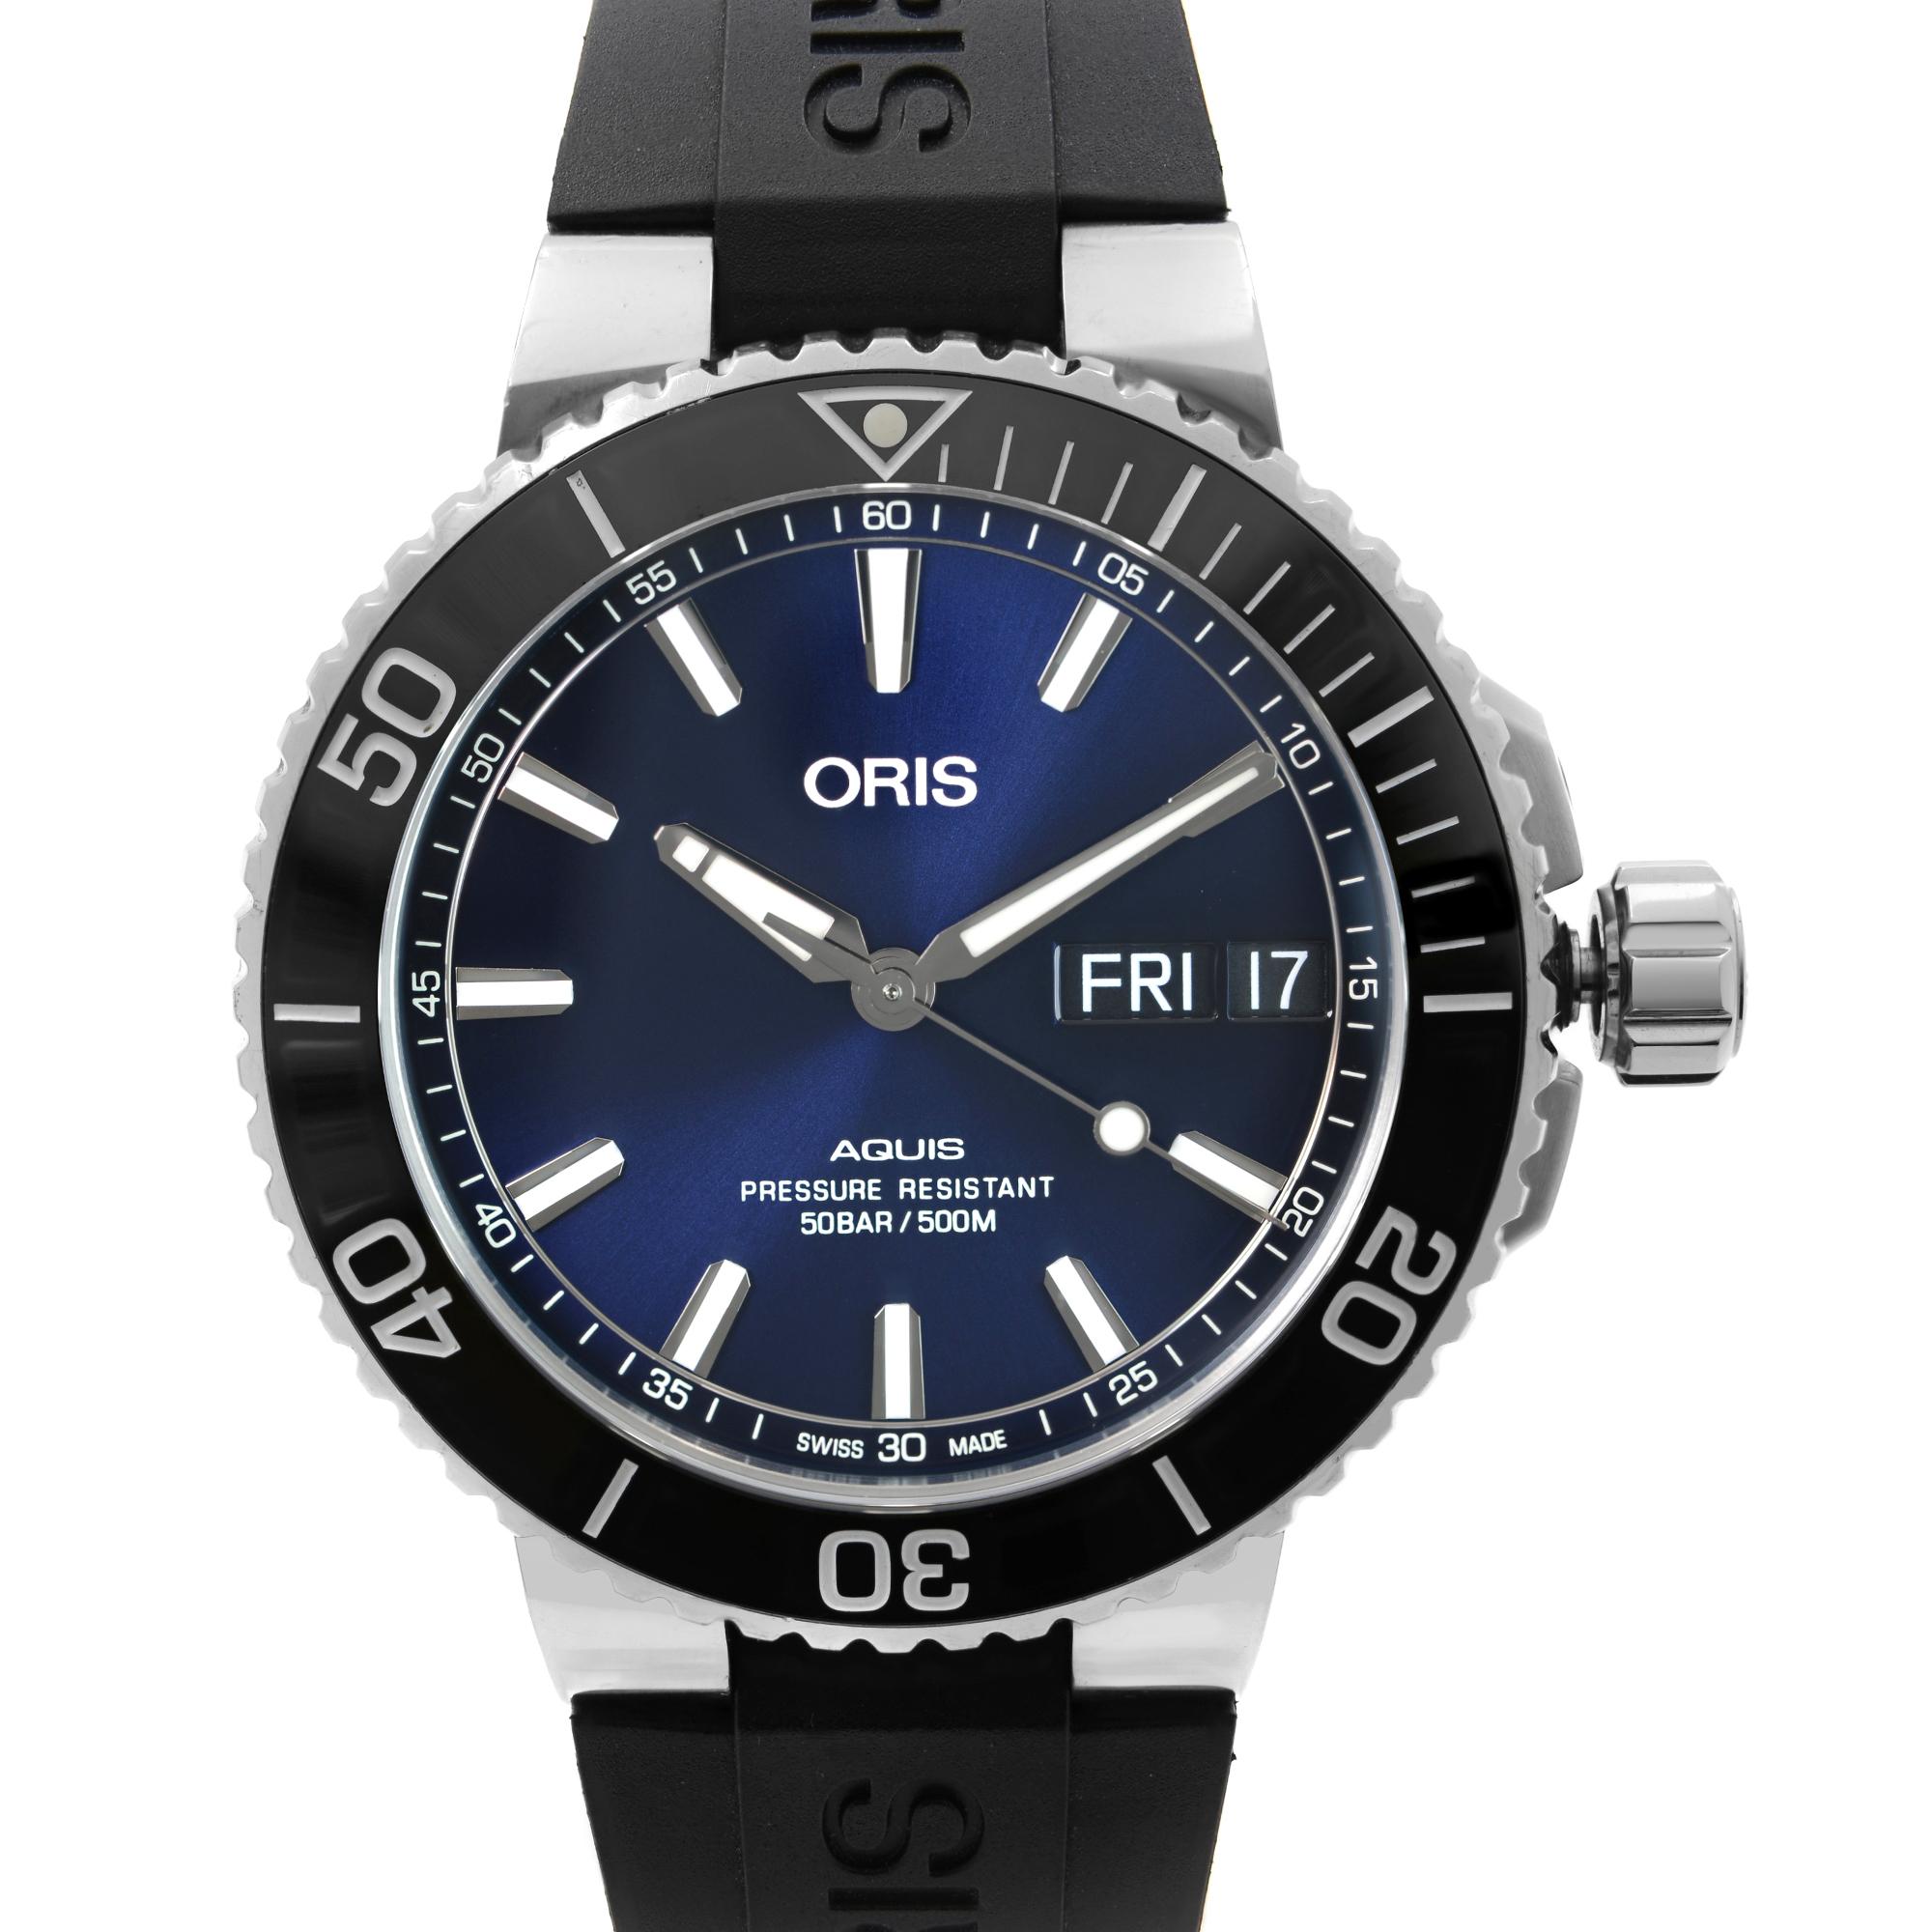 Display Model Oris Aquis Big Day Date Steel Blue Dial Rubber Strap Mens Watch 01 752 7733 4135-07 4 24 64EB. This Beautiful Timepiece is Powered by Mechanical (Automatic) Movement And Features: Round Stainless Steel Case with a Black Rubber that has